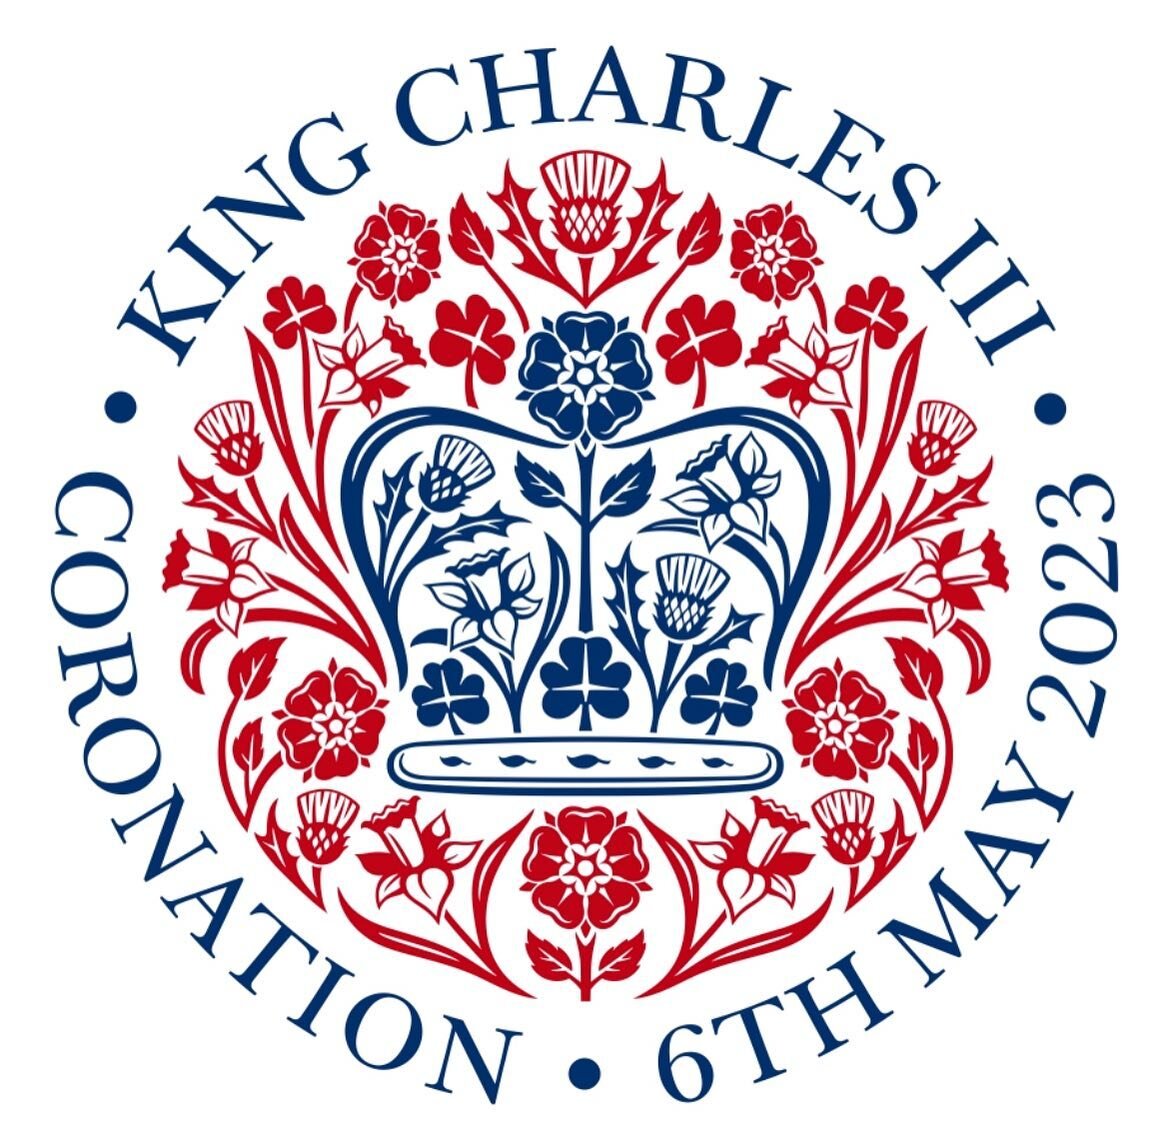 👑 The Elim Pentecostal Church prays for King Charles III

The National Leadership Team of the Elim Pentecostal Church extends heartfelt congratulations to His Majesty, King Charles III, on the occasion of his Coronation, which will take place on Sat